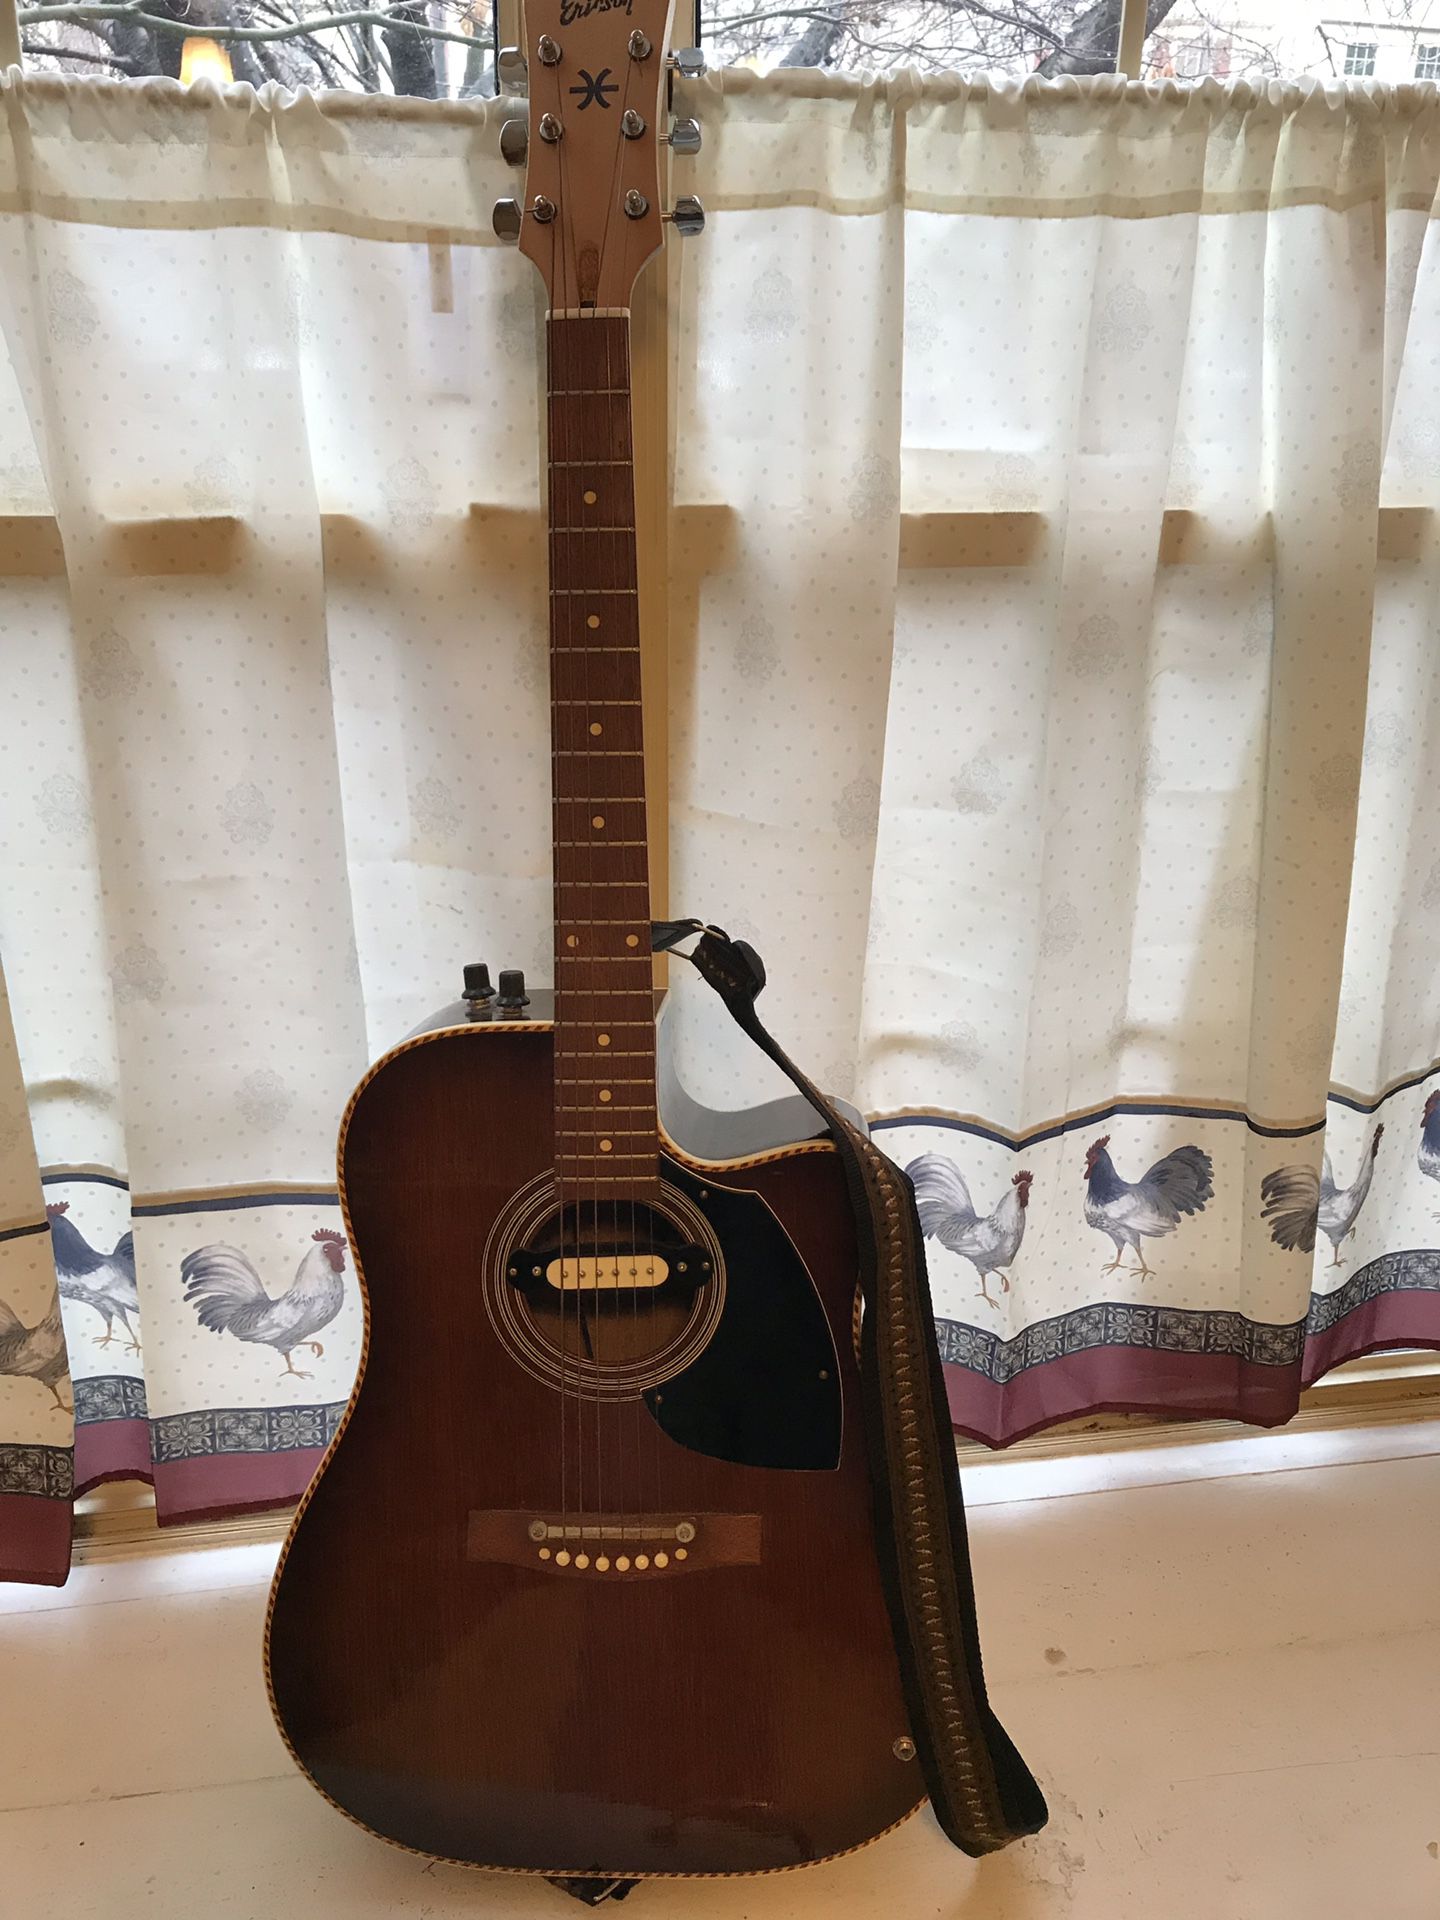 Ericsson electric guitar with belt